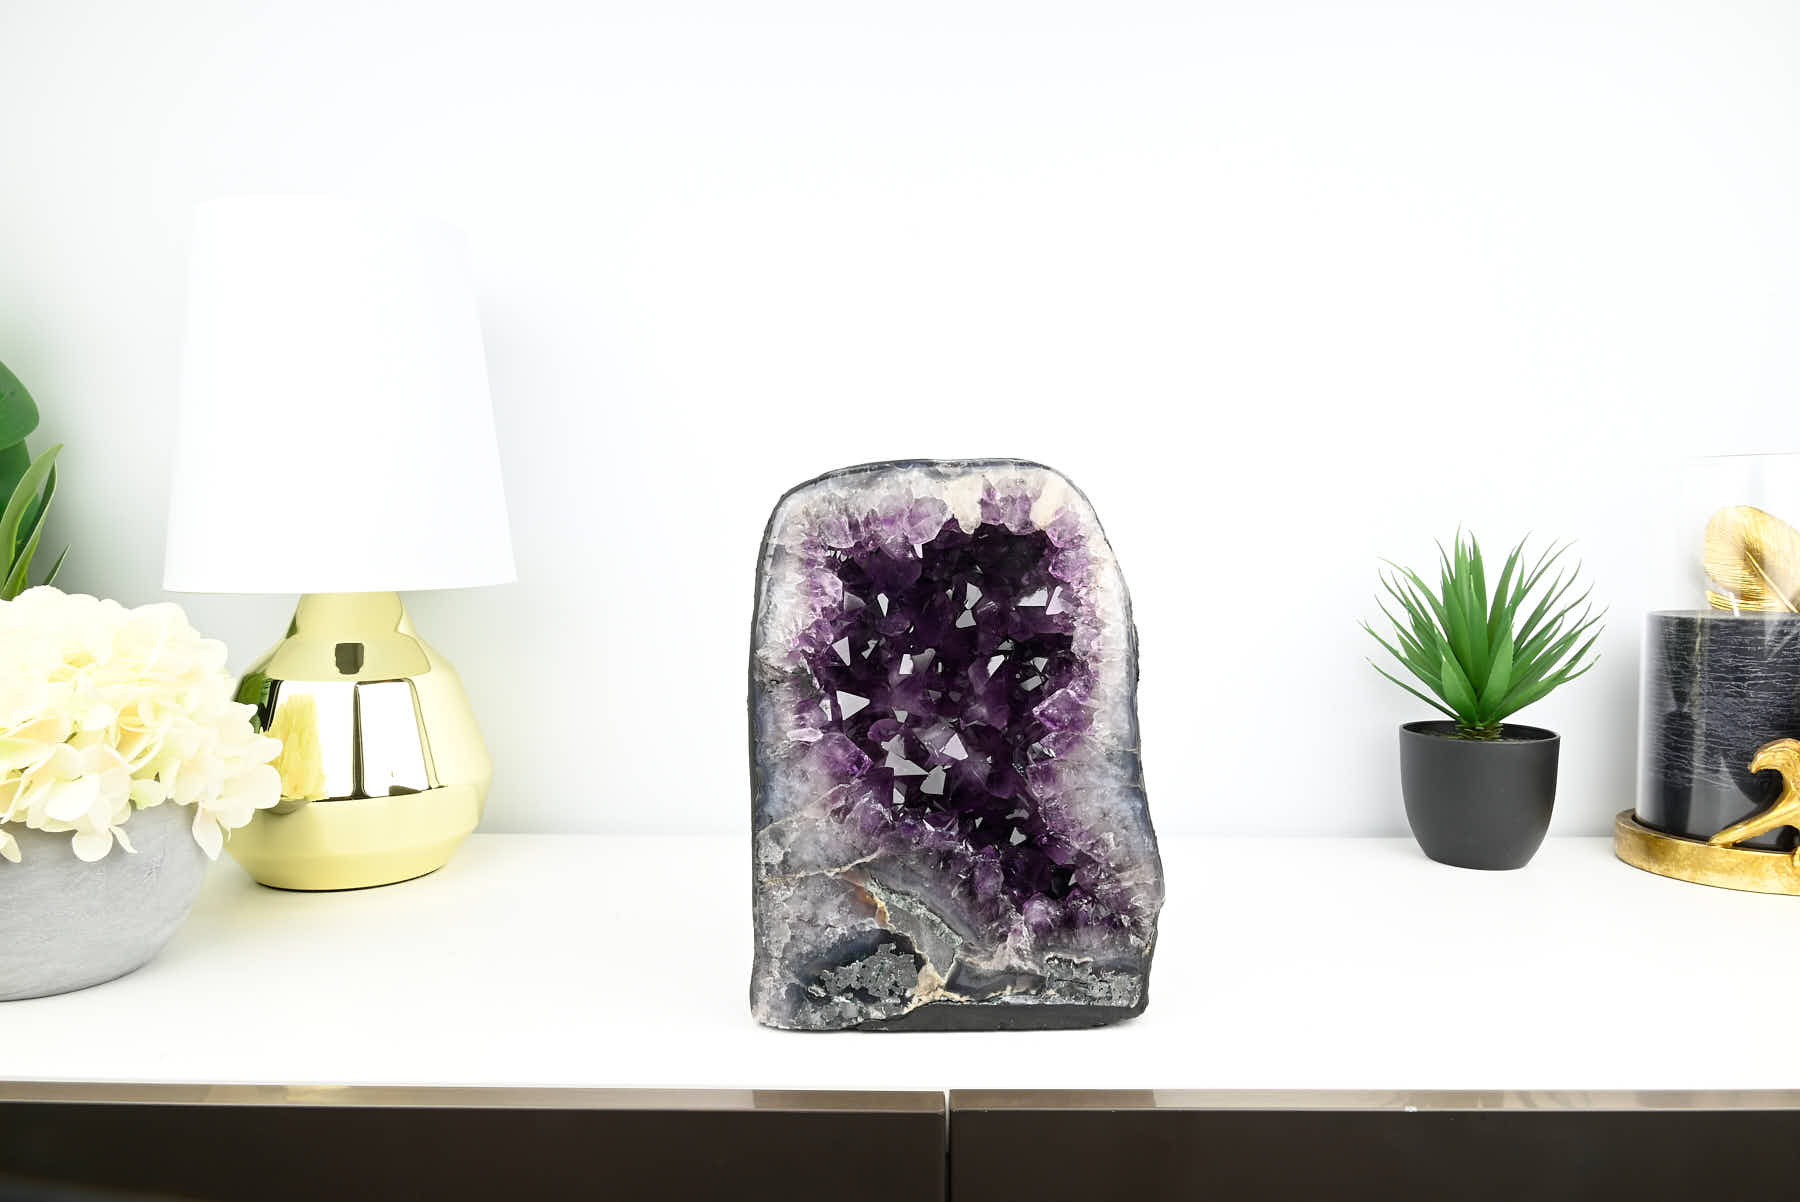 Extra Quality Amethyst Cathedral - 7.78kg, 25cm tall - #CAAMET-10031